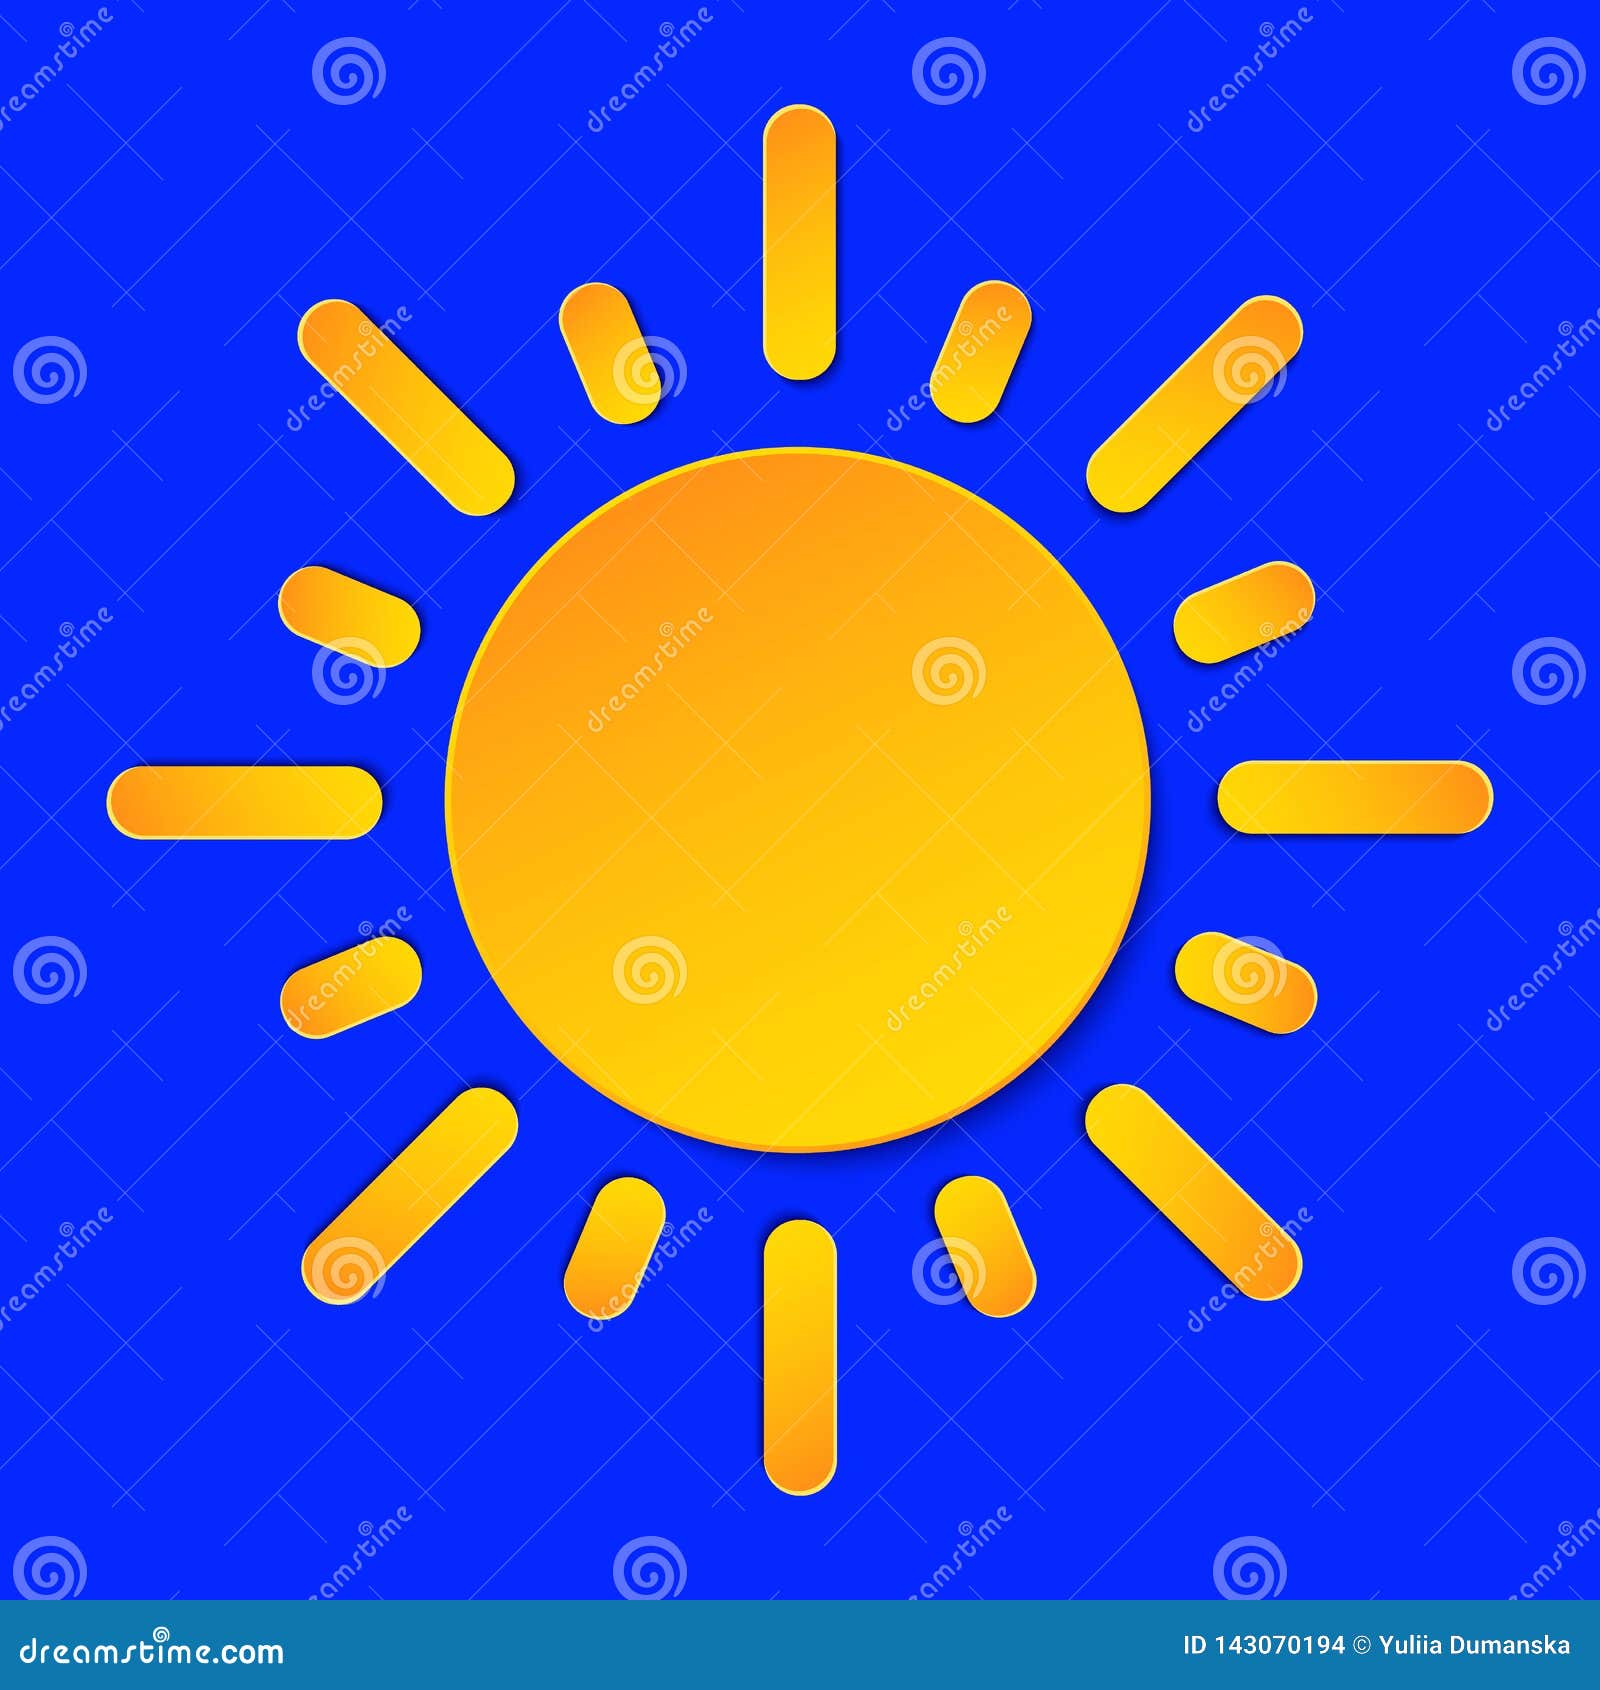 Sunny Day Weather Forecast Info Icon. Yellow Sun Symbol Paper Cut Style on  Blue. Climate Weather Element Stock Vector - Illustration of flat, cartoon:  143070194